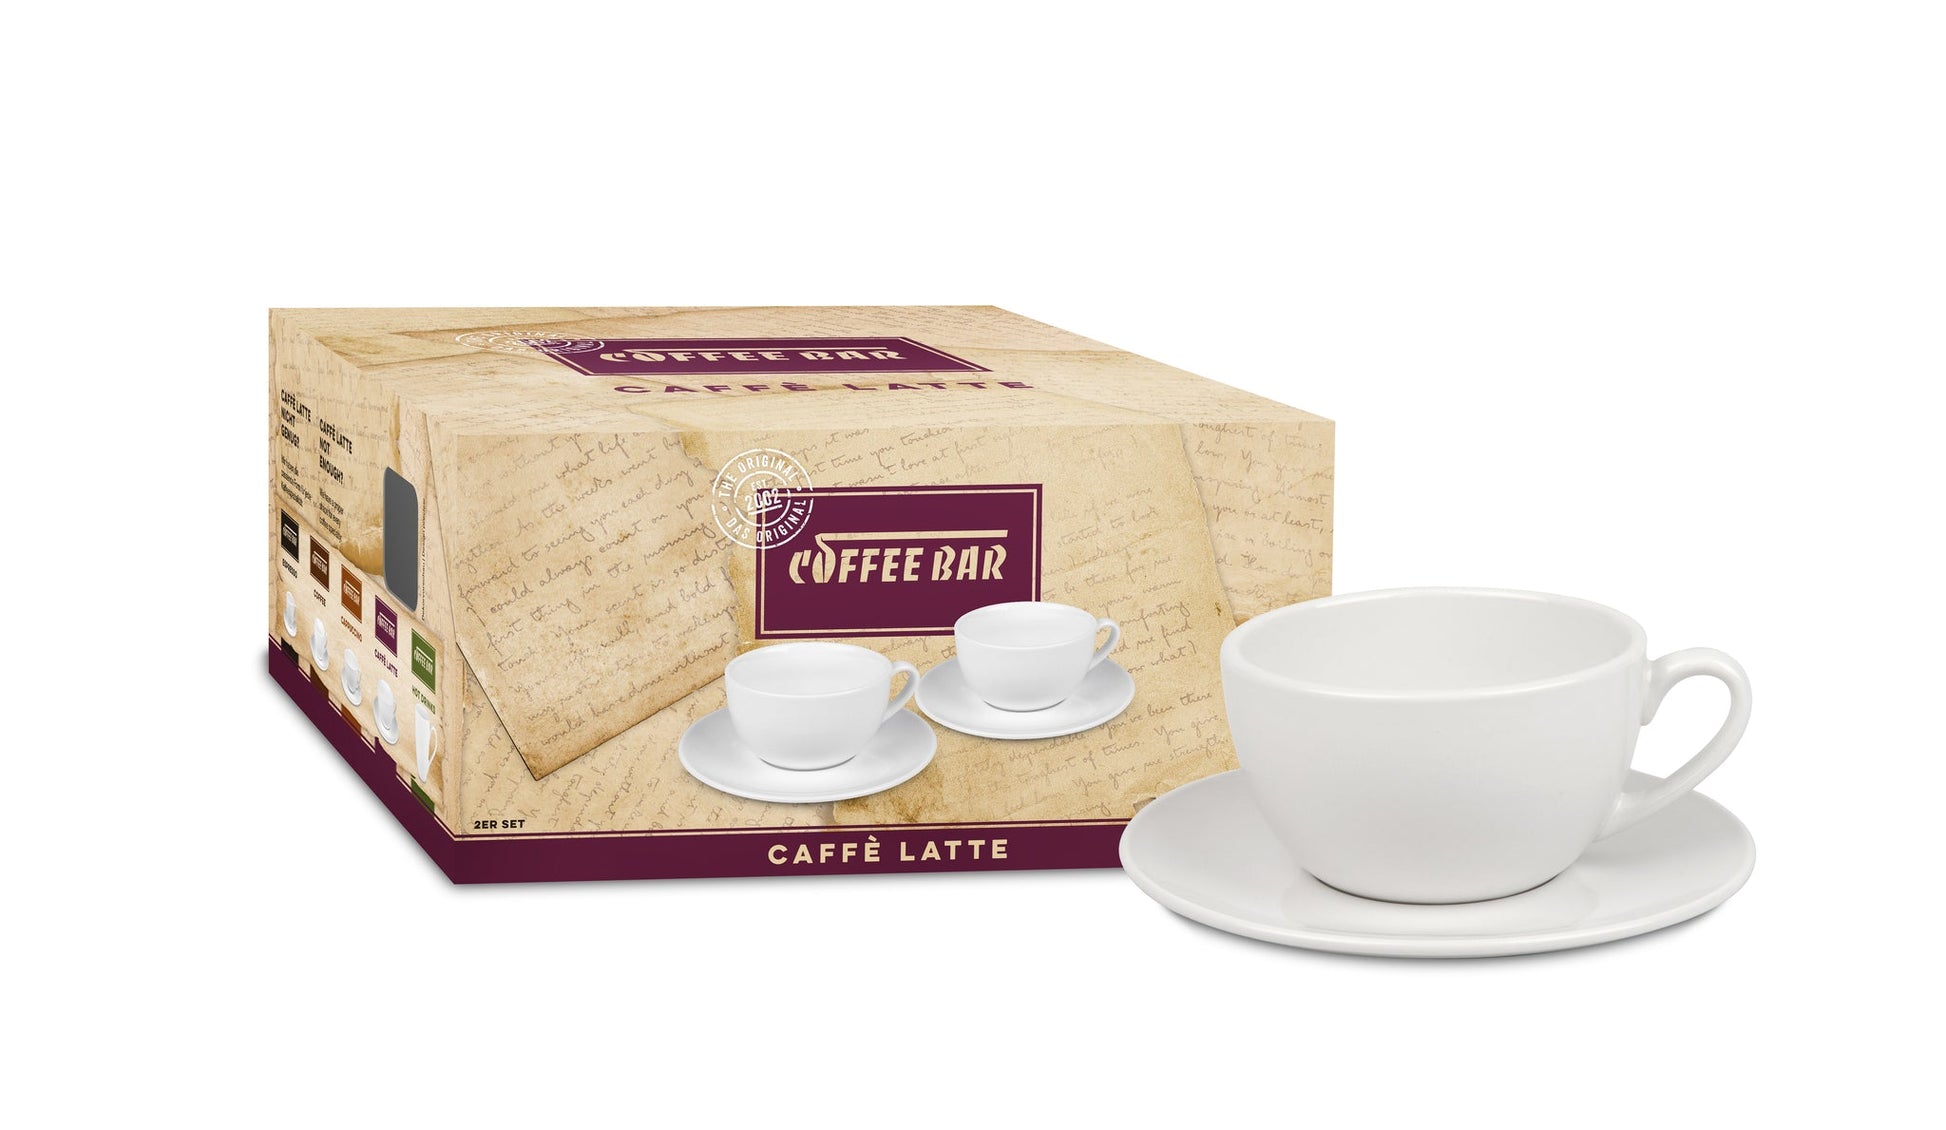 Coffee Bar - Latte Cup And Saucer (sold individually)